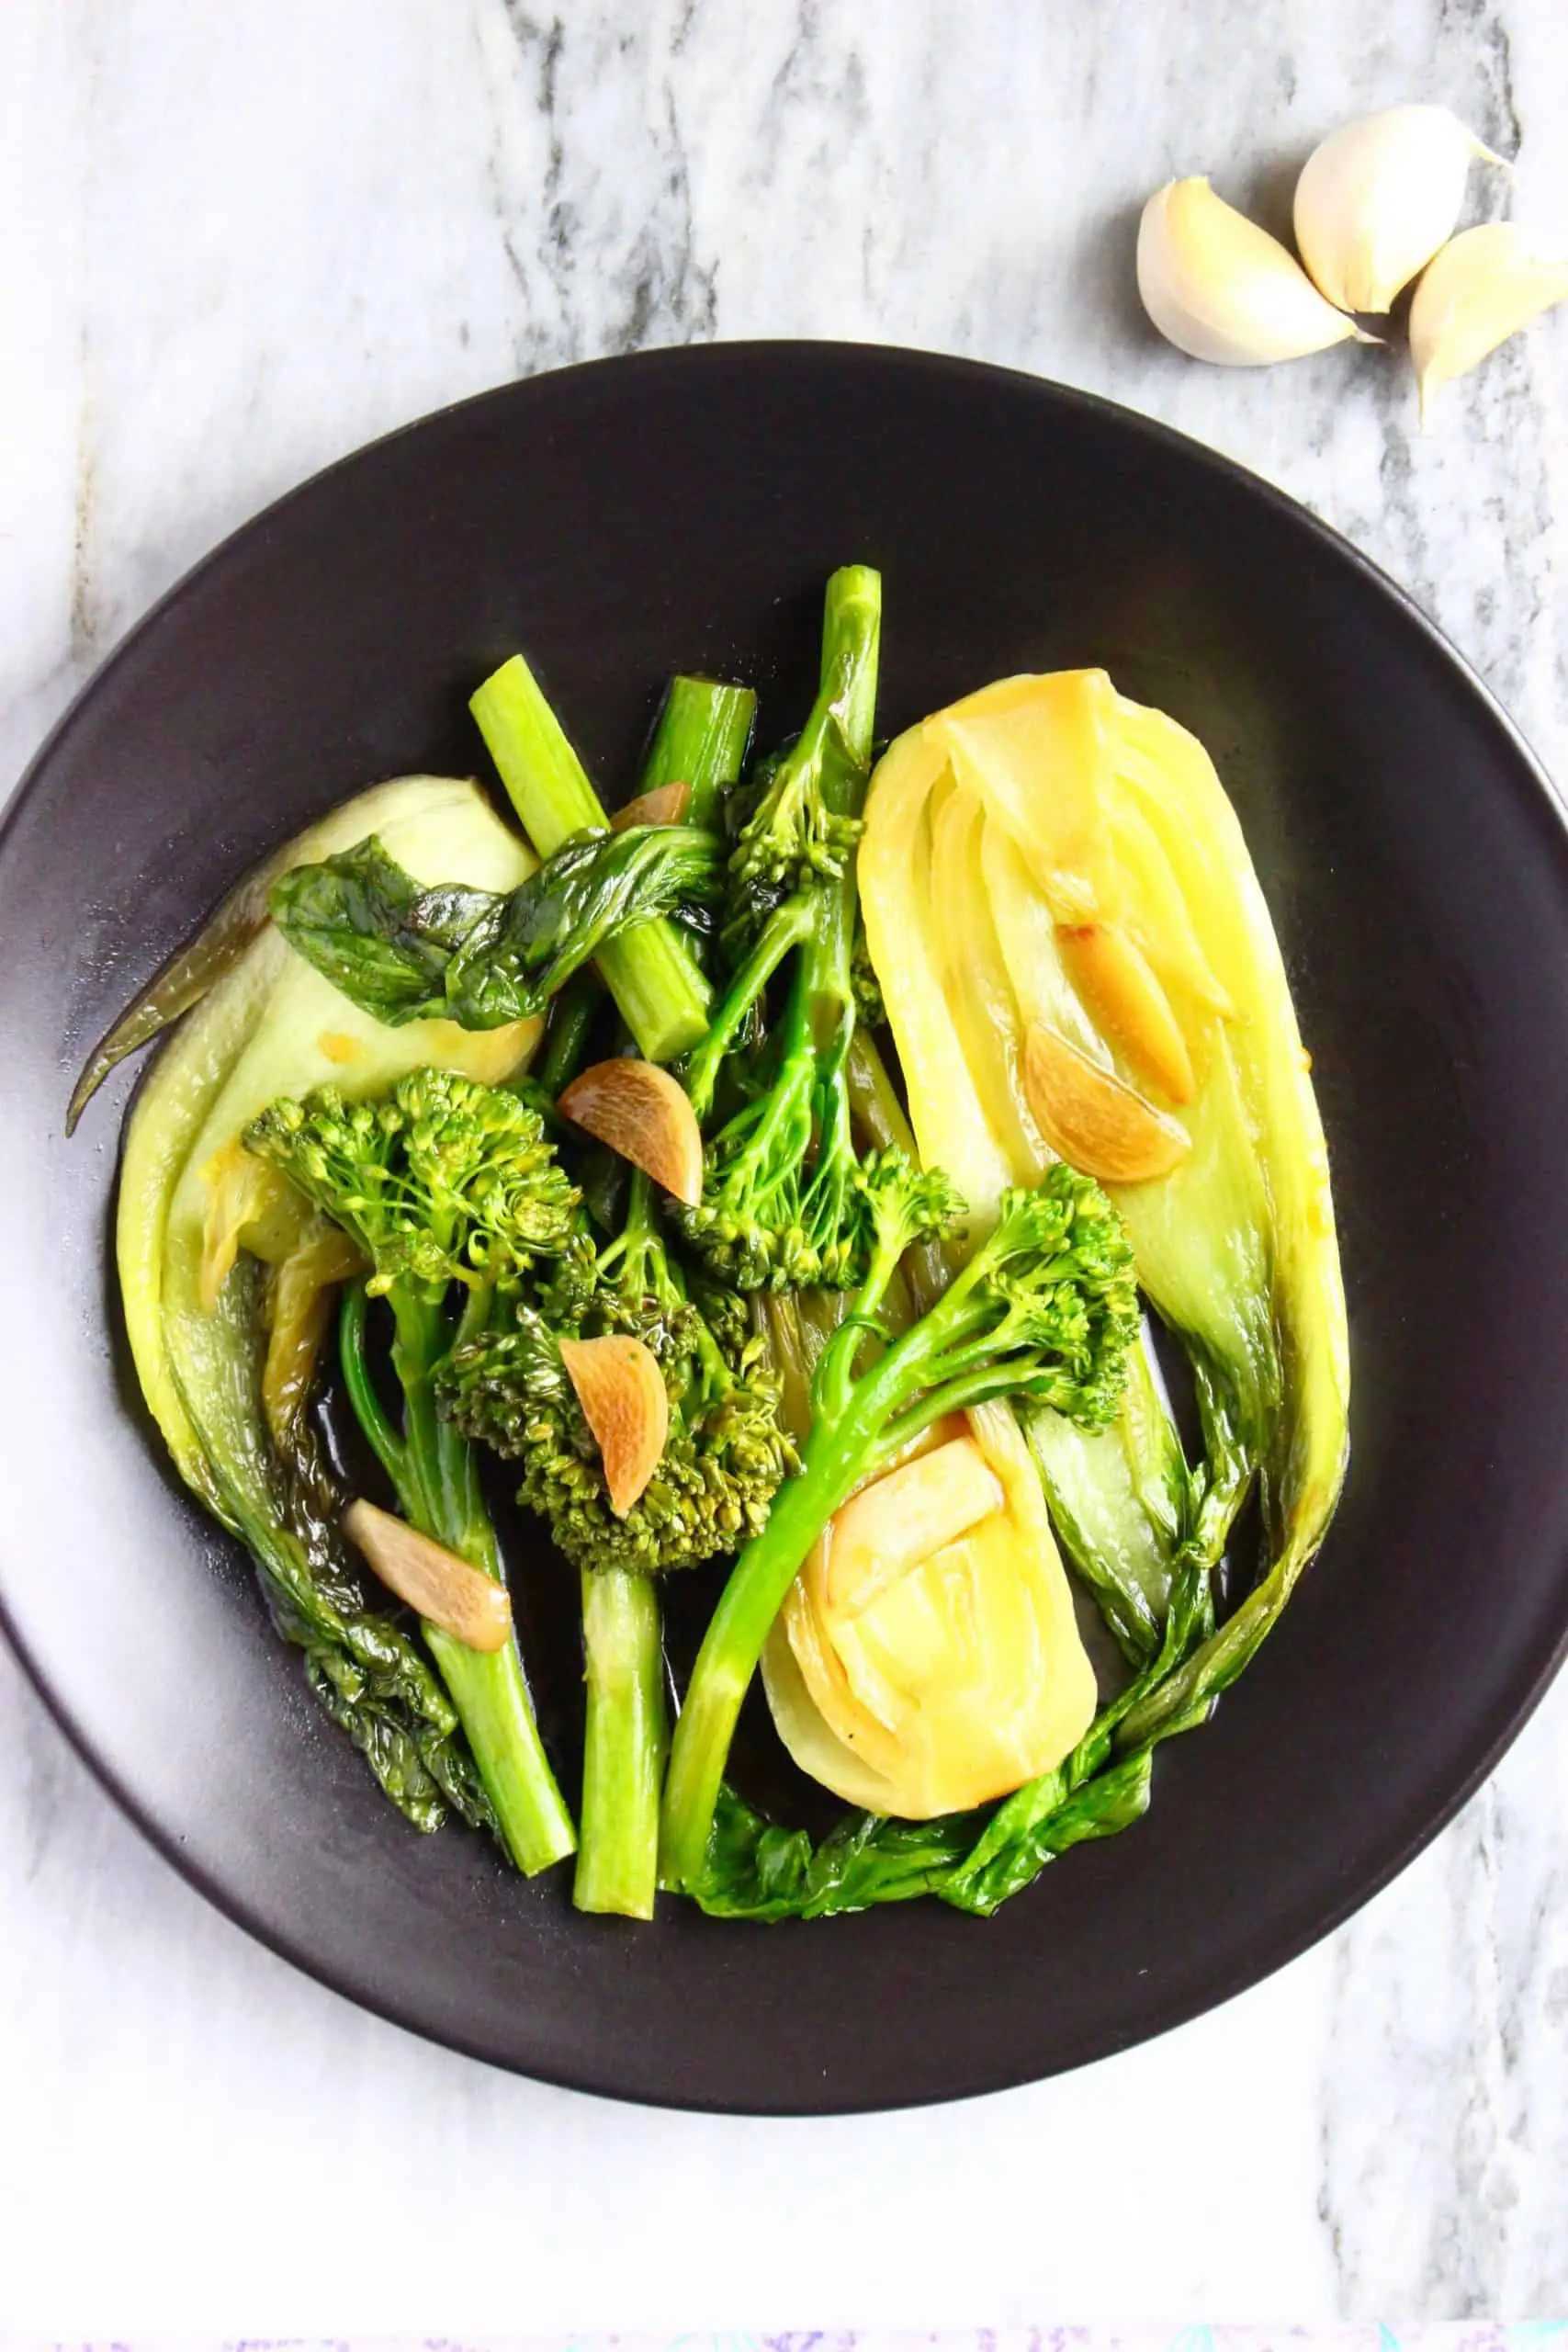 Broccoli, pak choi and sliced garlic in a brown sauce on a black plate